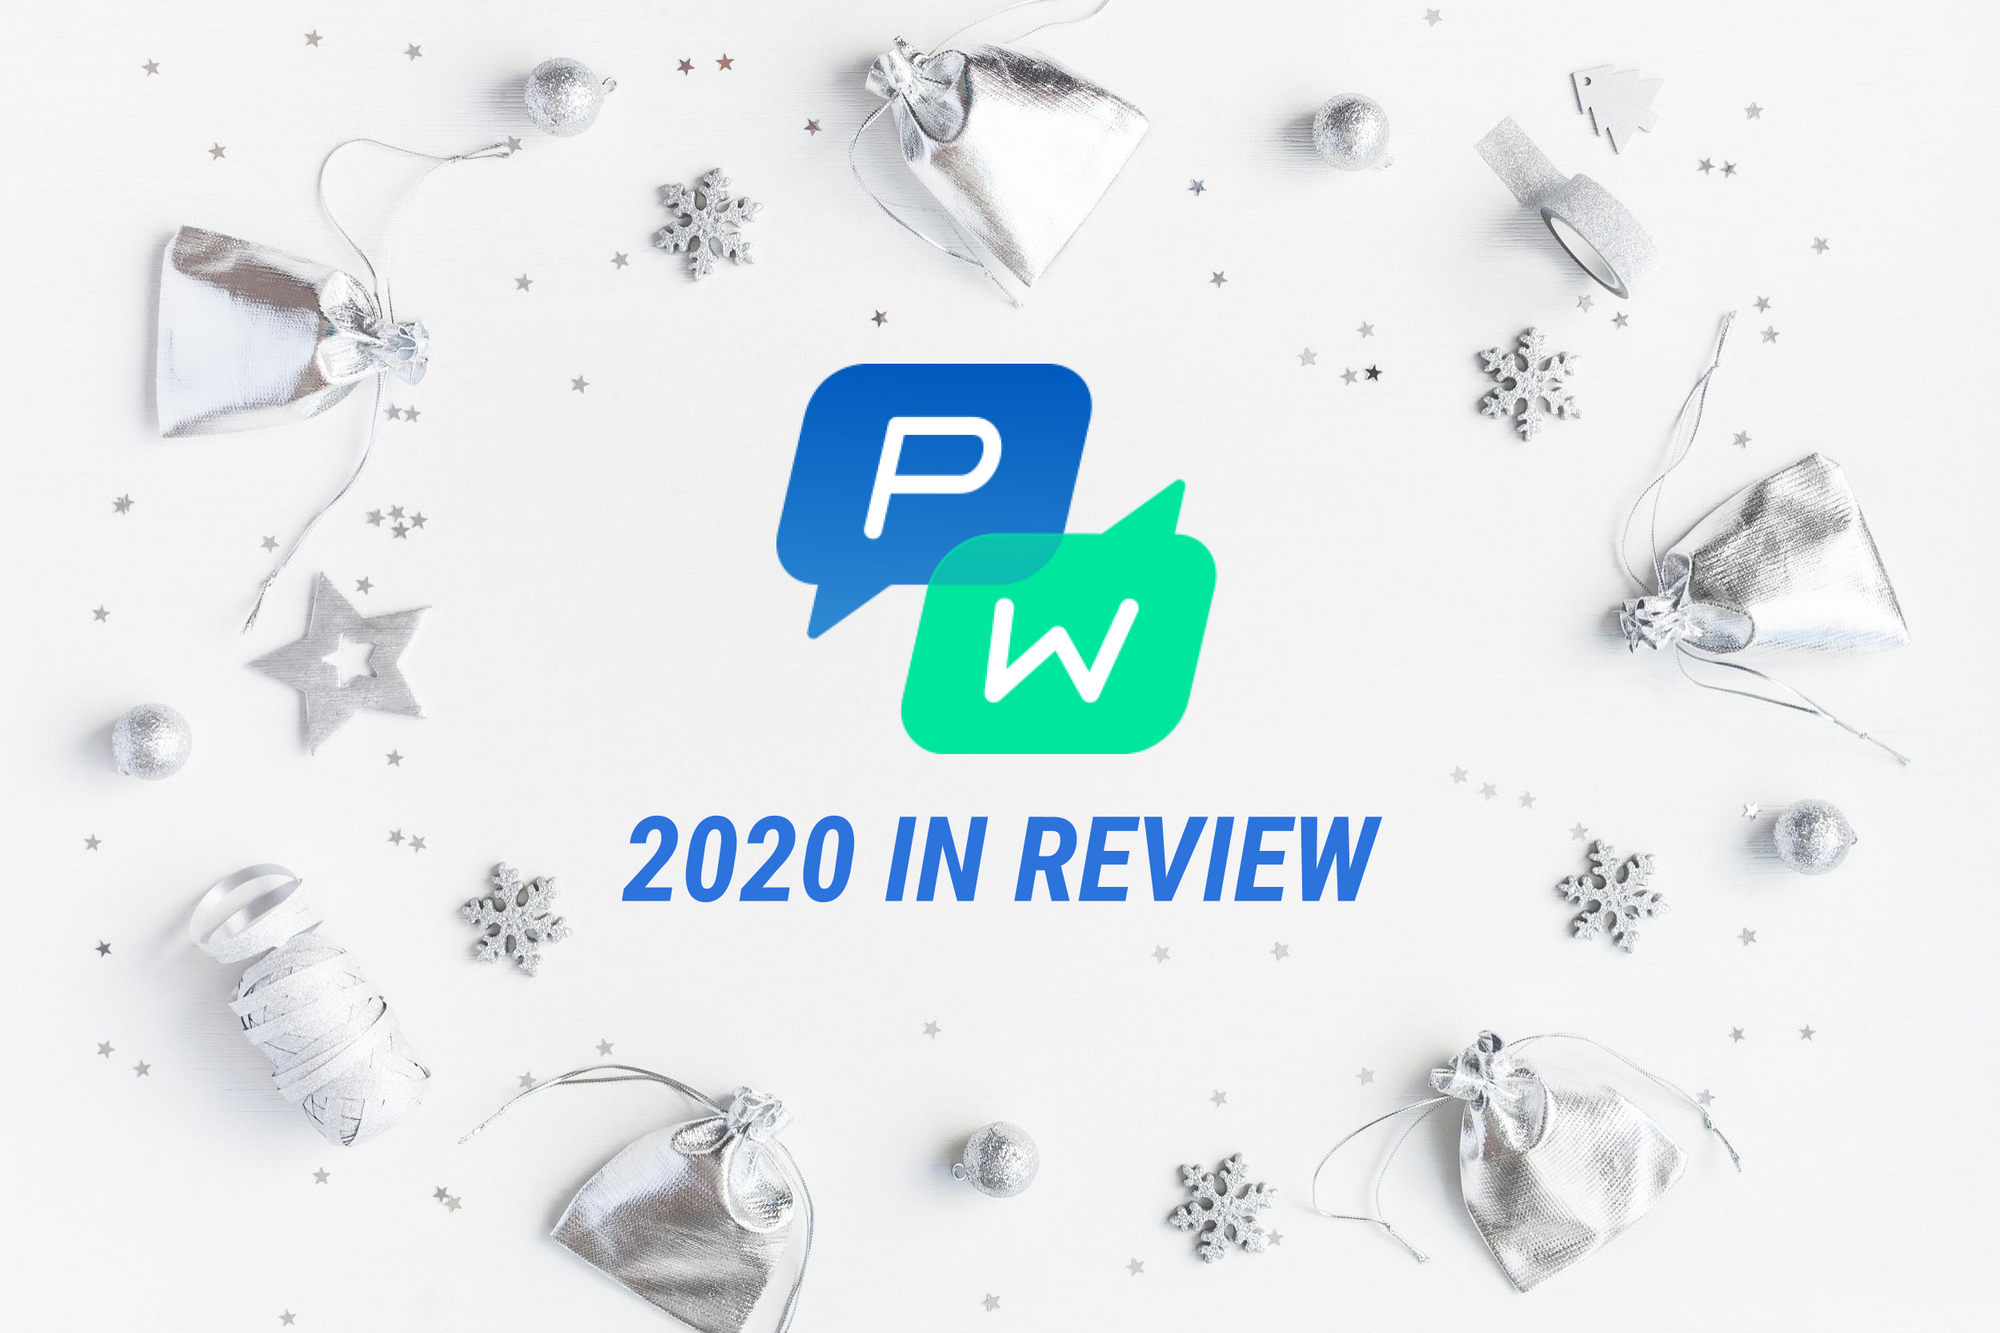 10 Best New Pushwoosh Features: 2020 in Review